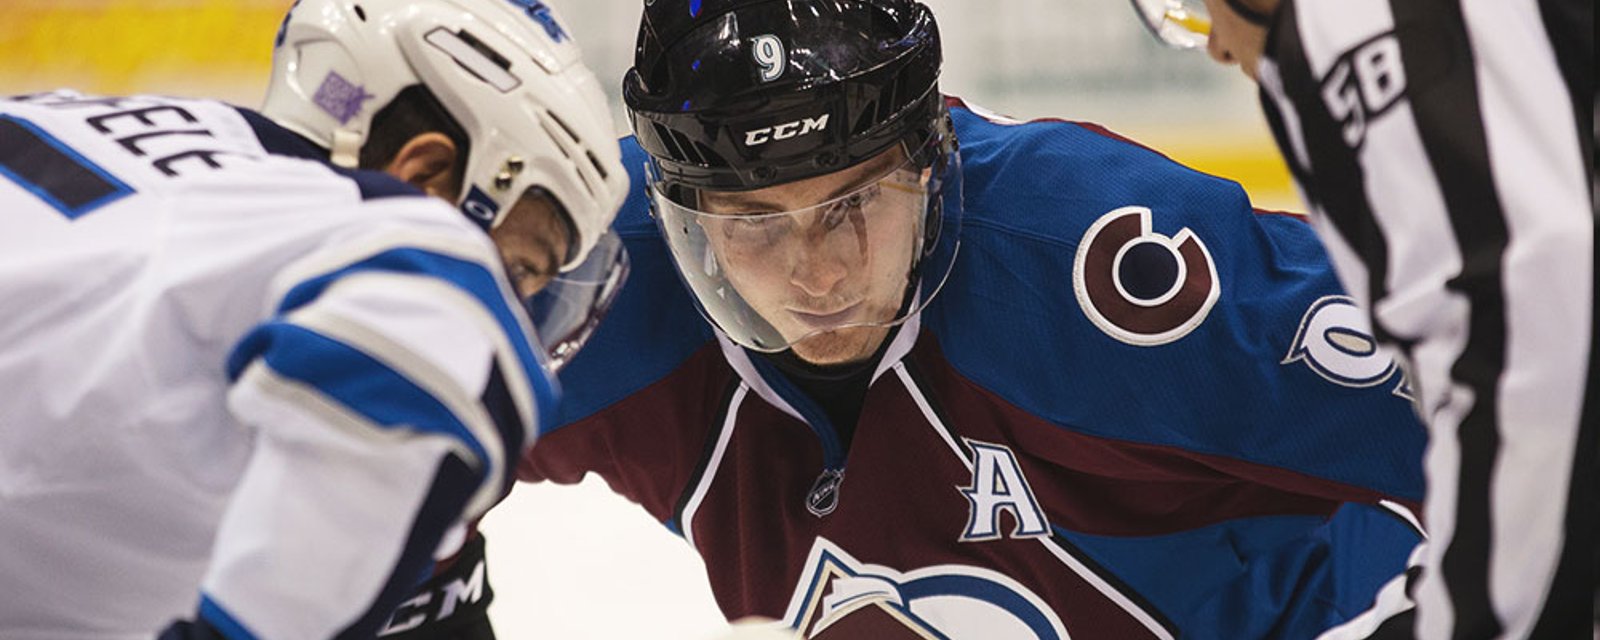 Report: Five teams negotiating with Avs for Duchene